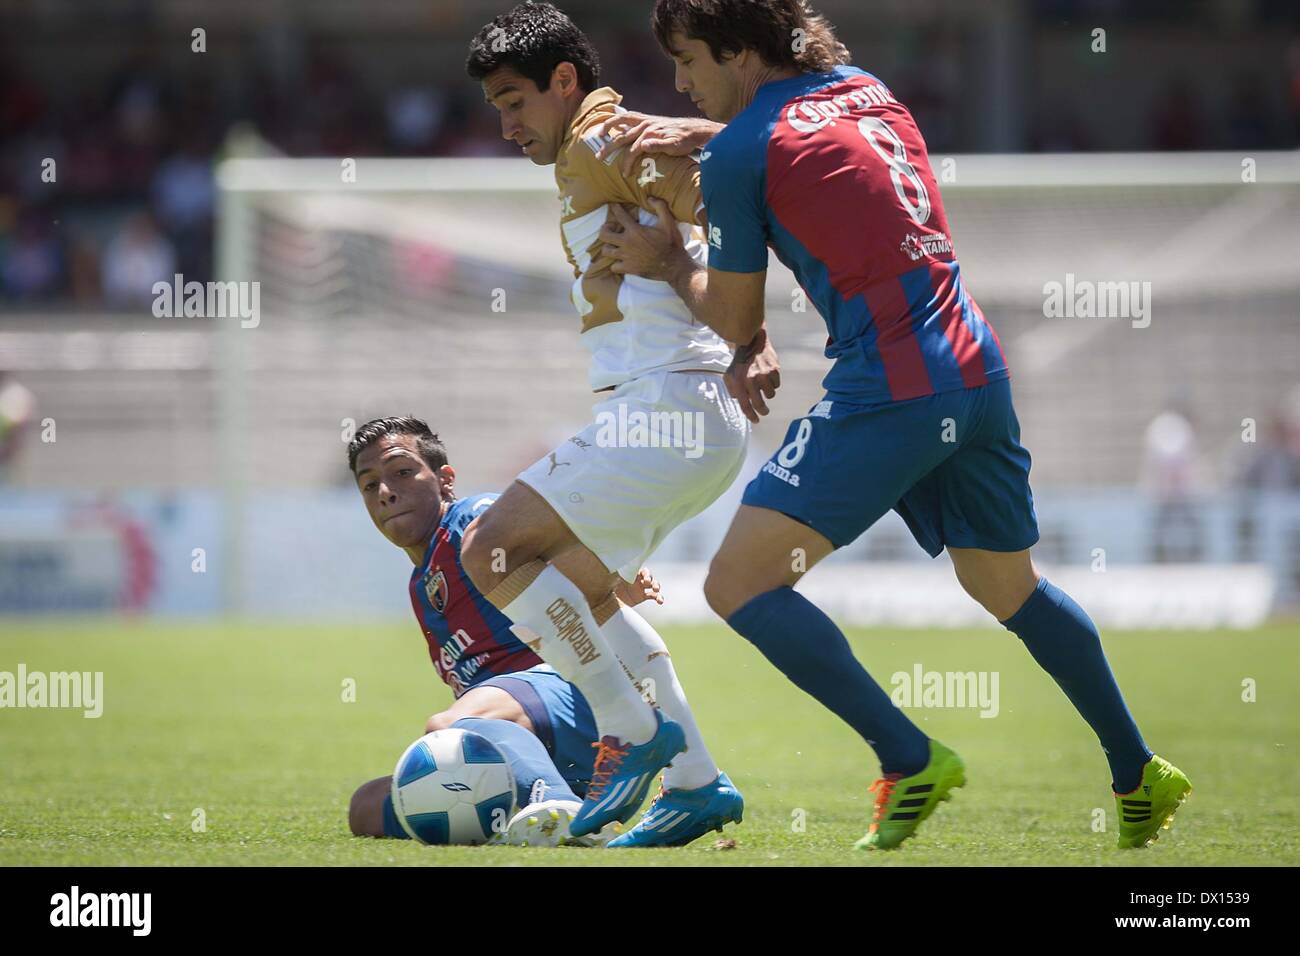 Mexico City, Mexico. 16th Mar, 2014. Luis Fuentes(C) of UNAM's Pumas vies for the ball with Martin Galmarini(R) of Atlante during their match of the 2014 MX League Closing Tournament at University Olympic Stadium in Mexico City, capital of Mexico, on March 16, 2014. Credit:  Pedro Mera/Xinhua/Alamy Live News Stock Photo